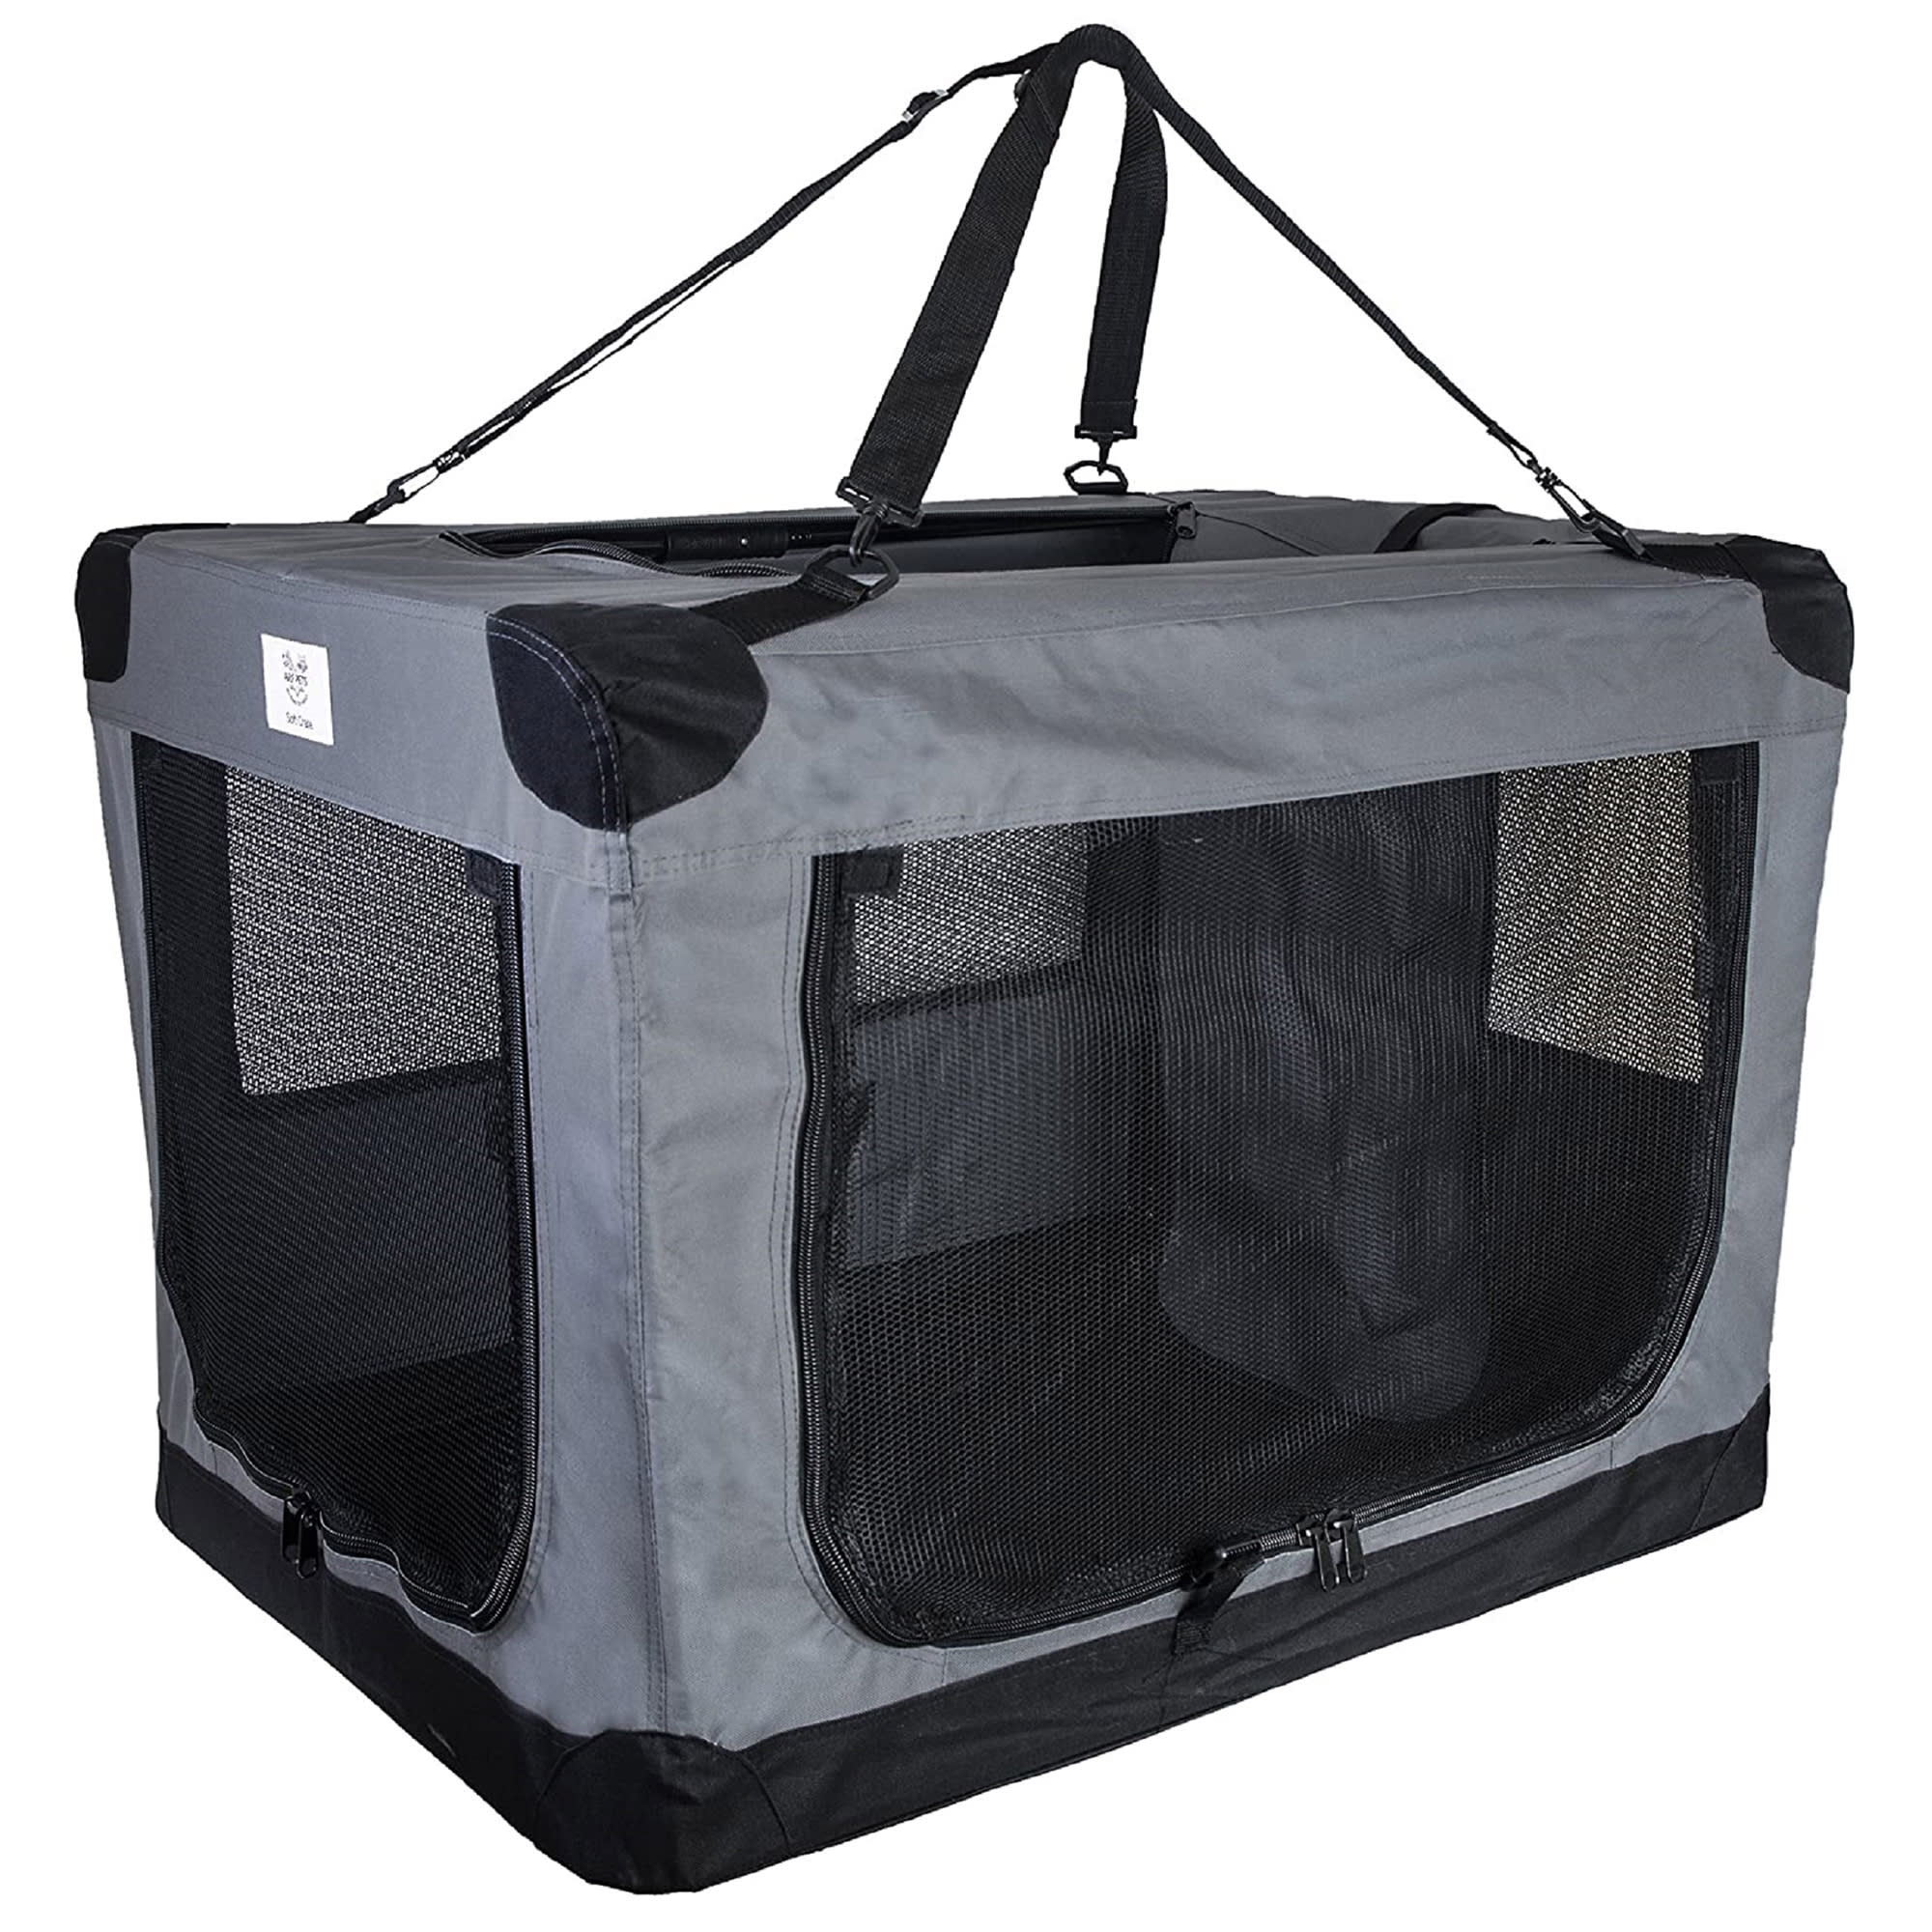 Arf Pets Dog Soft Crate 36 Inch Kennel – Soft Sided 3 Door Folding